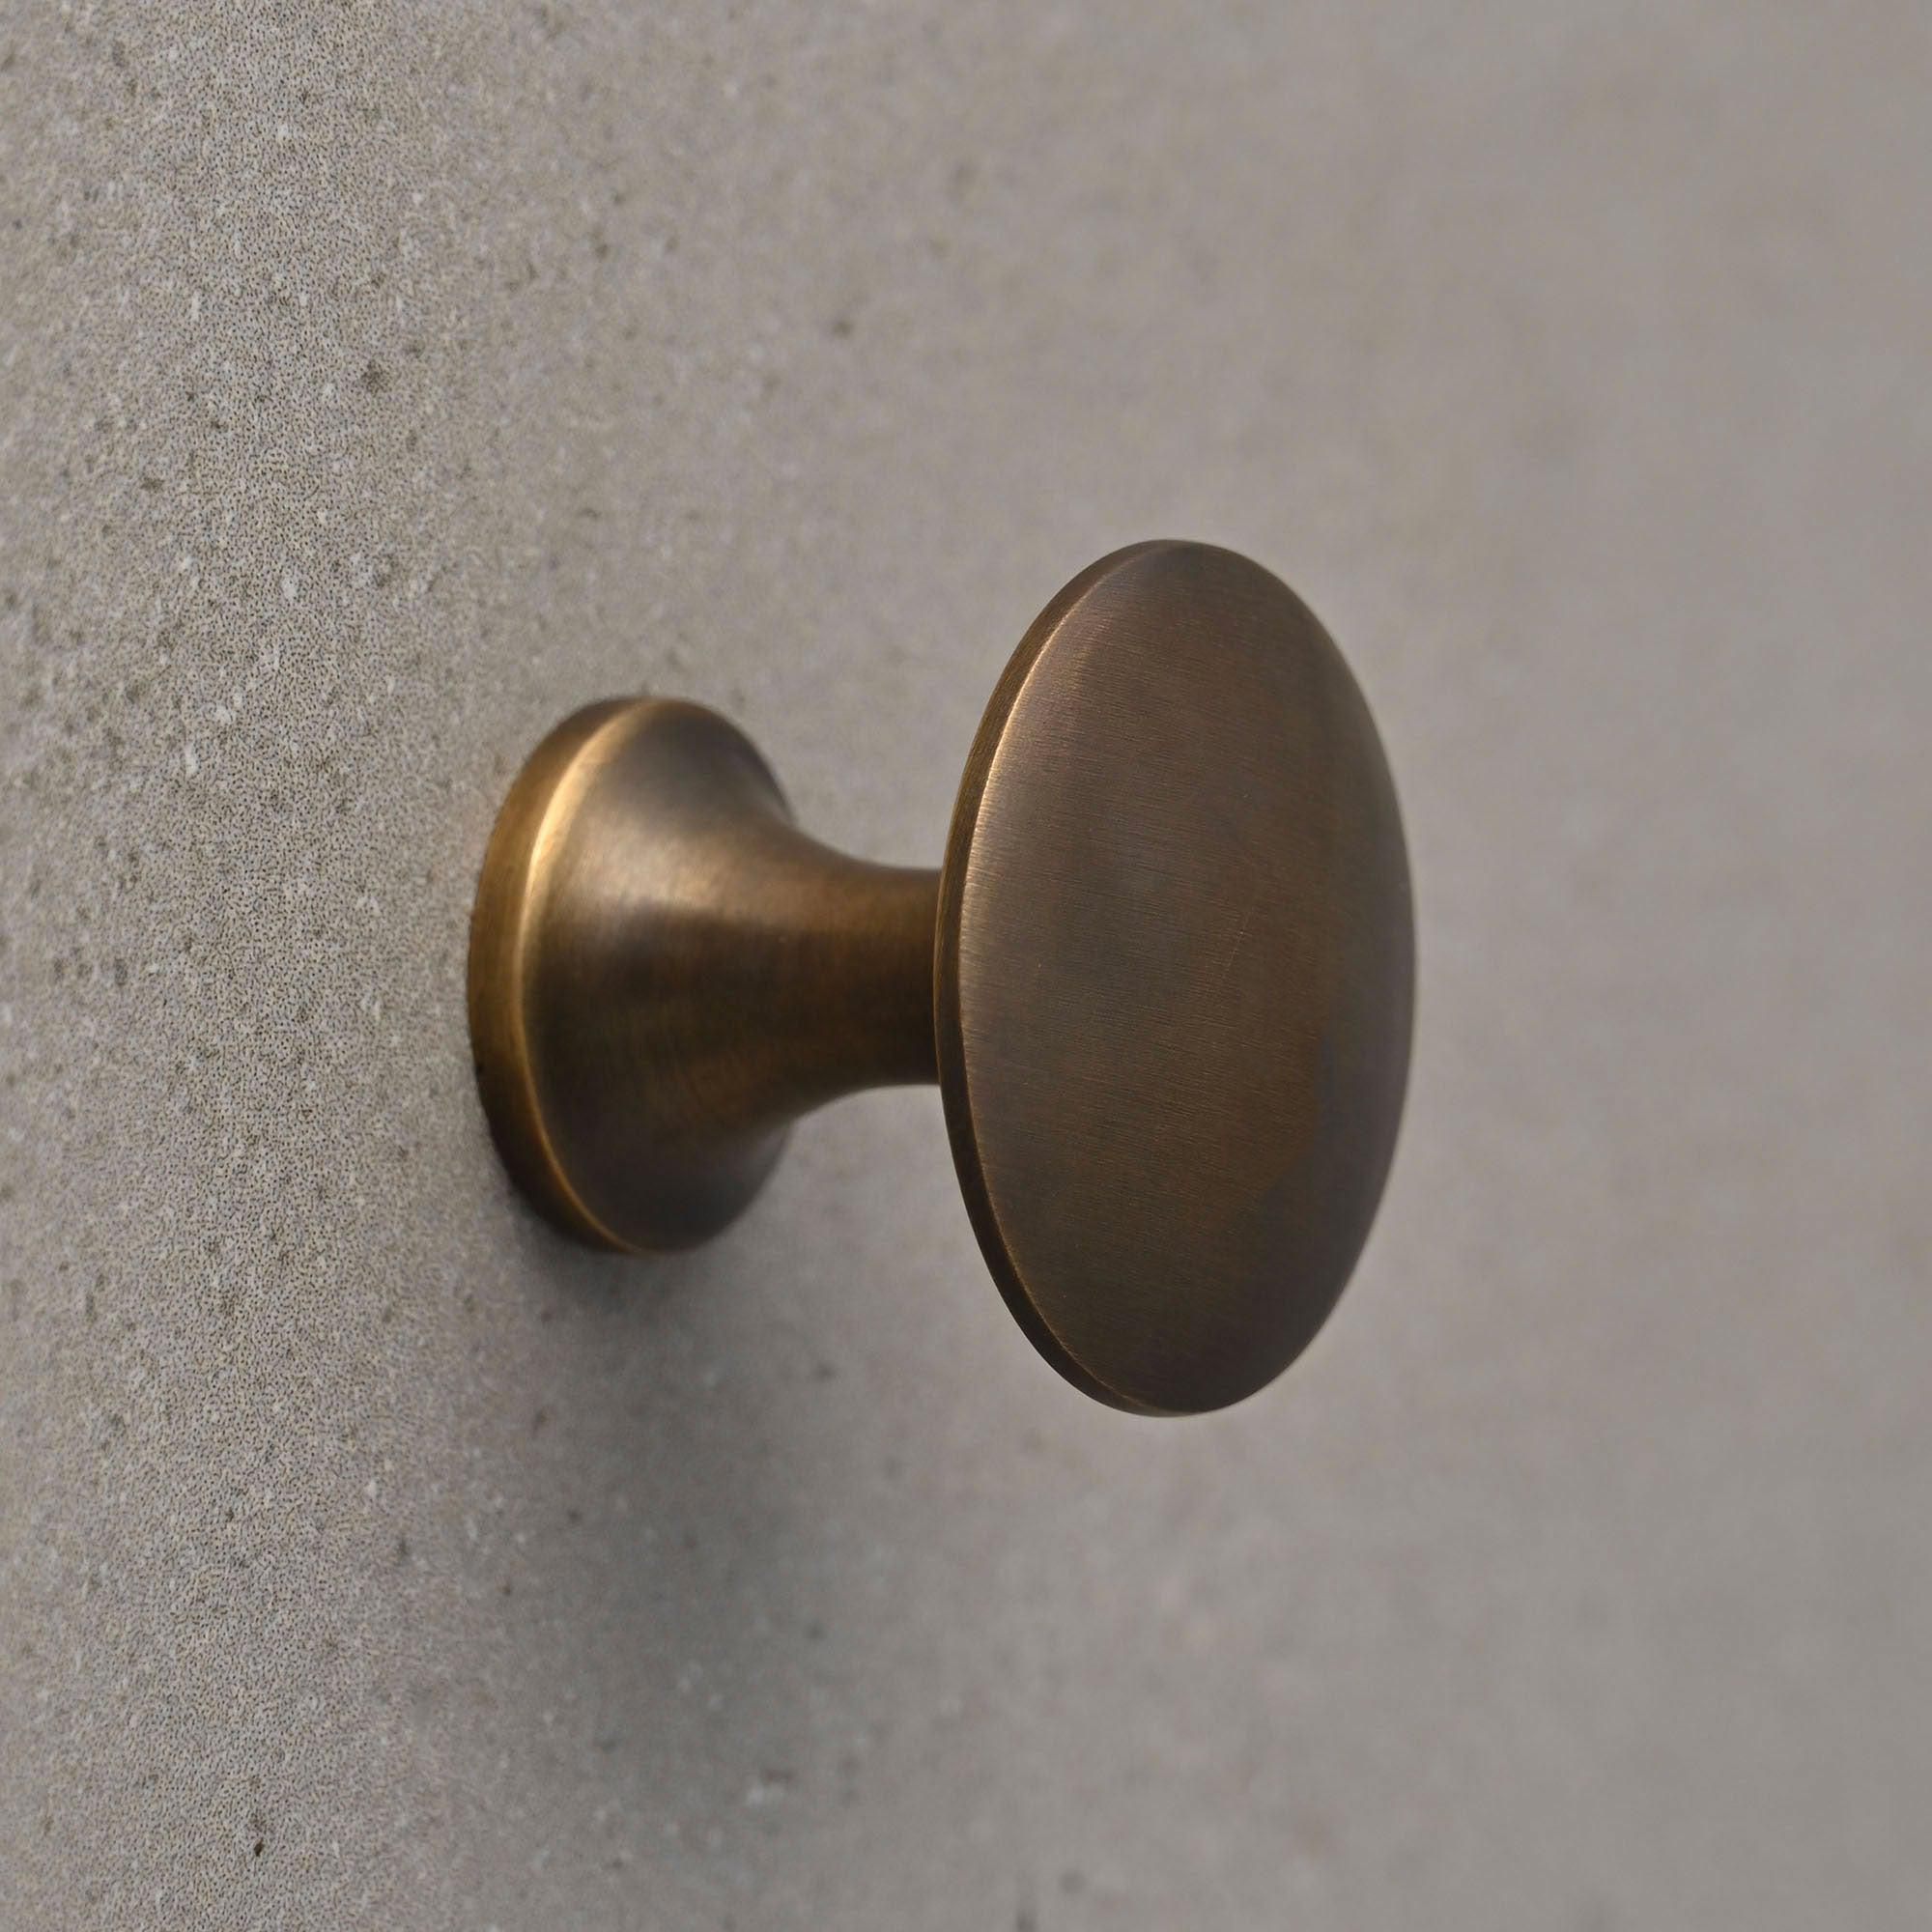 Brass Drawer Pulls park in Aged Brass Cabinet Knobs and Handles